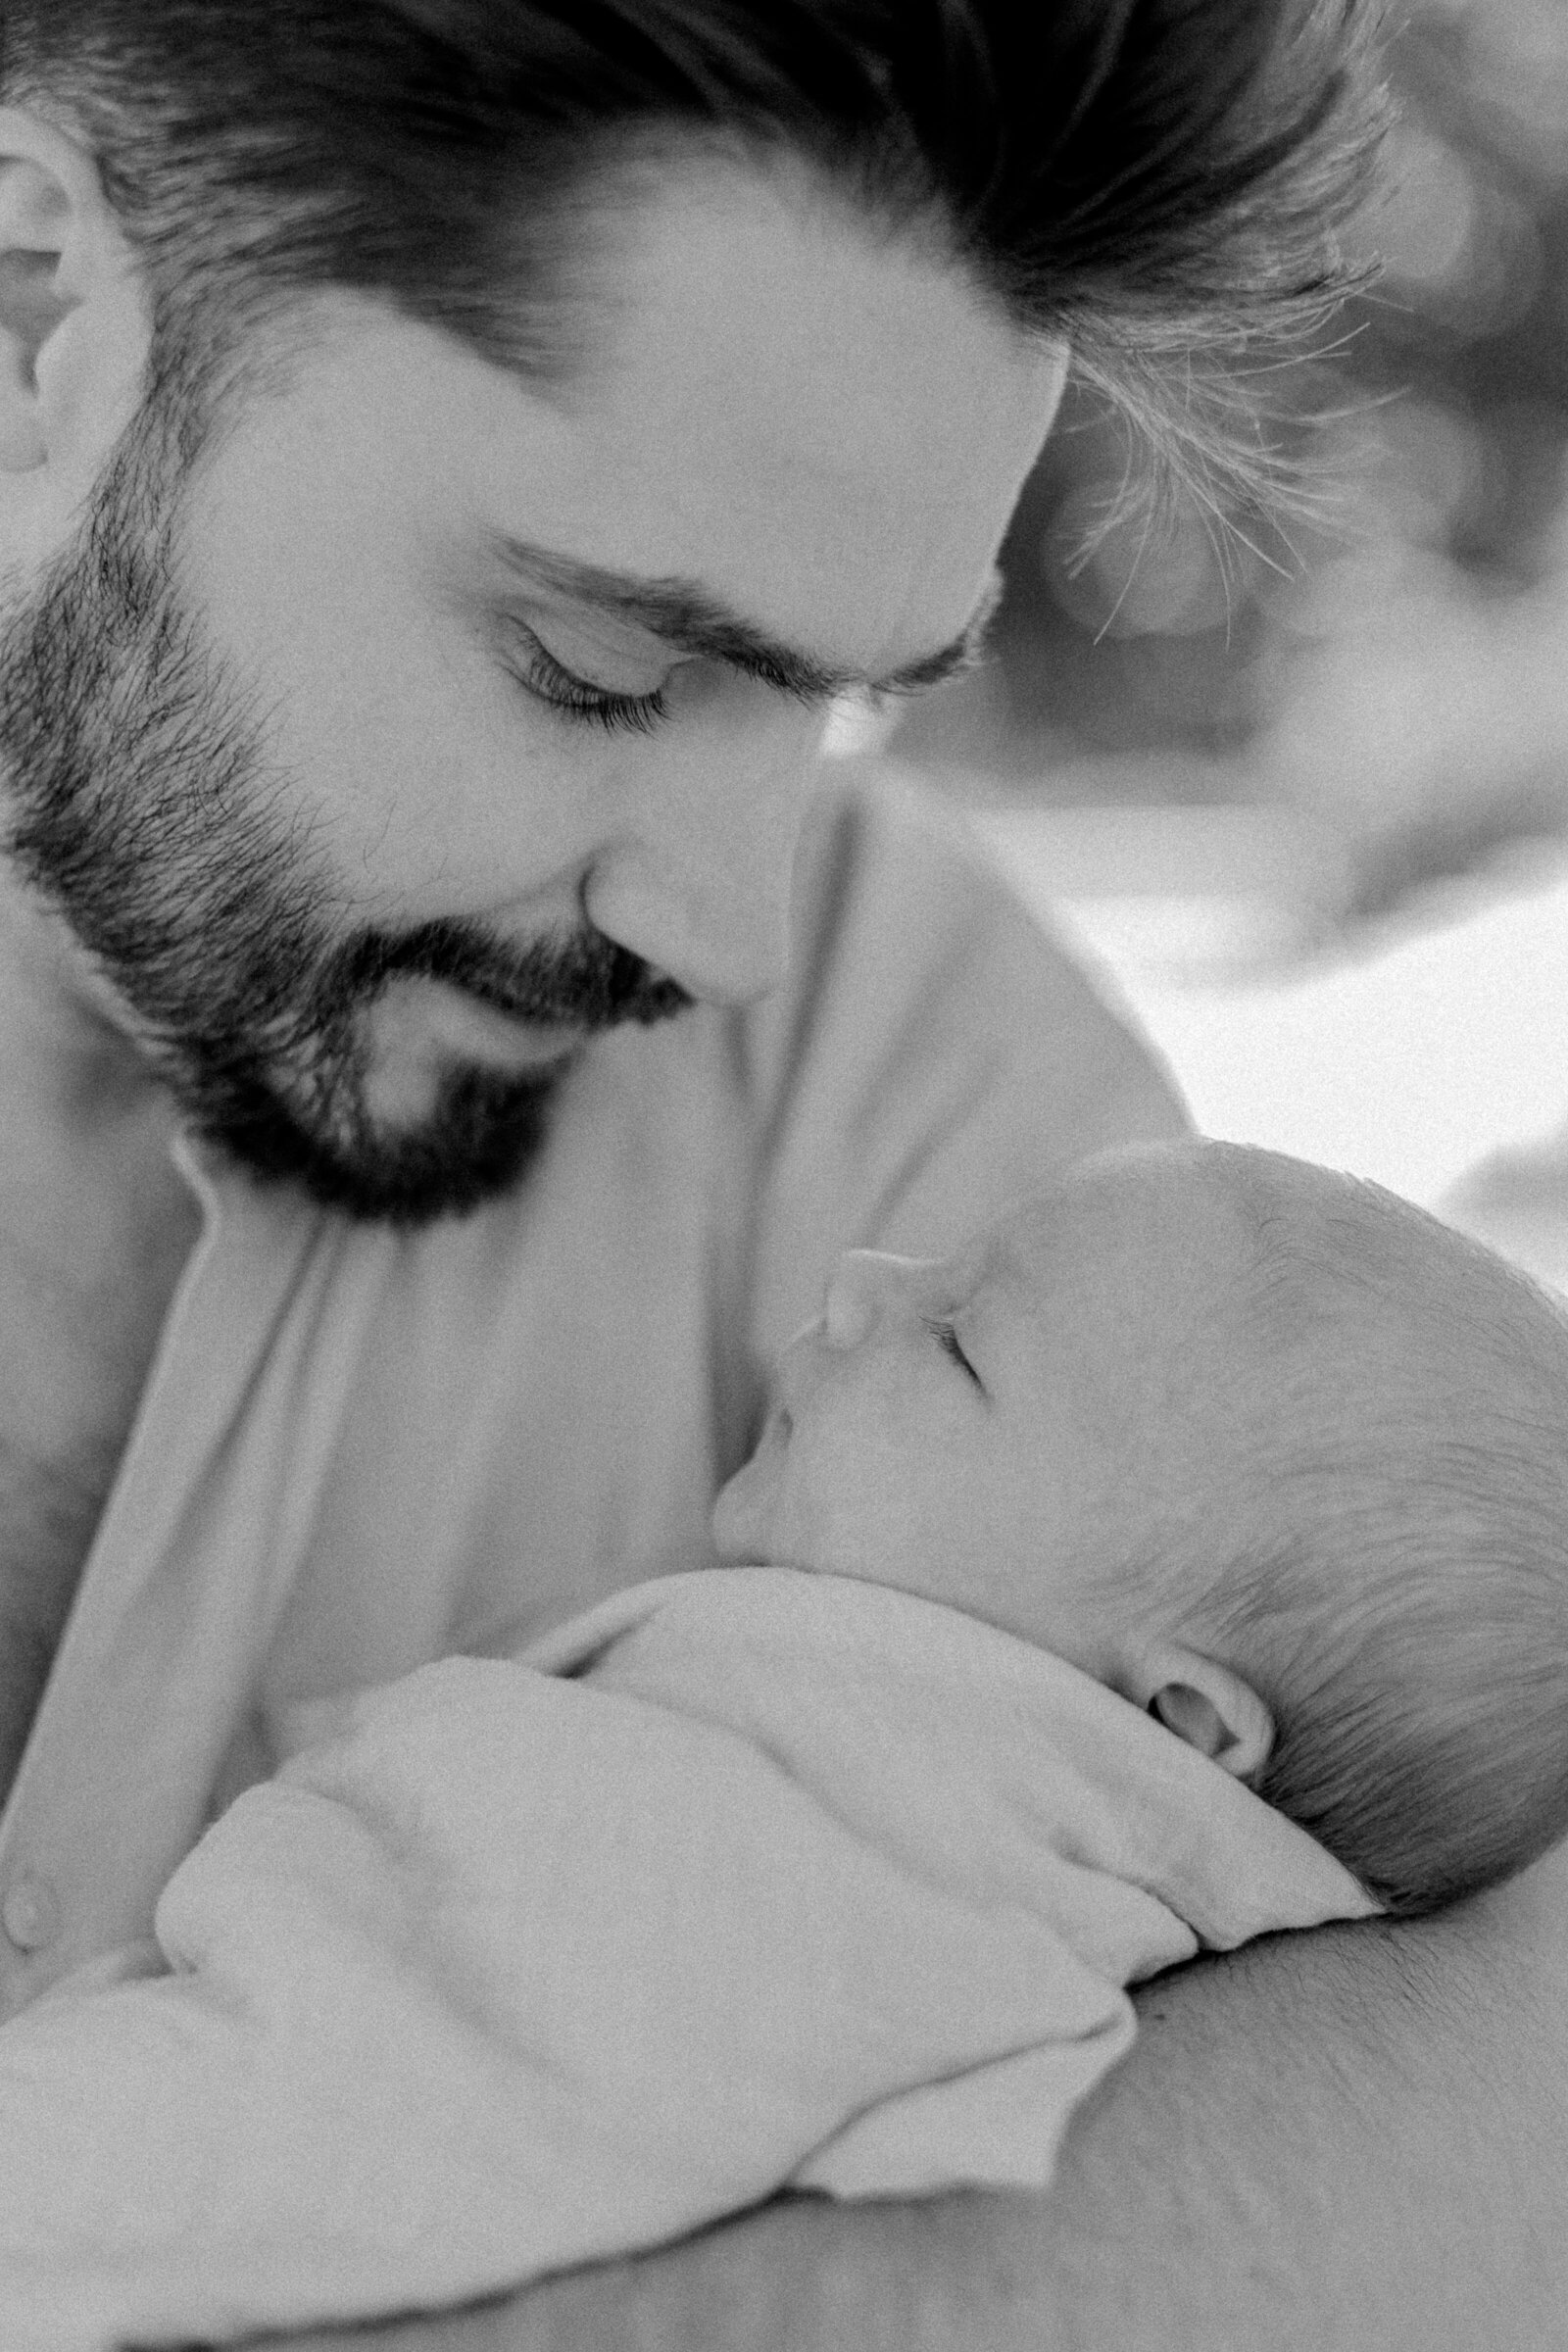 A black and white image of a father holding his newborn baby boy